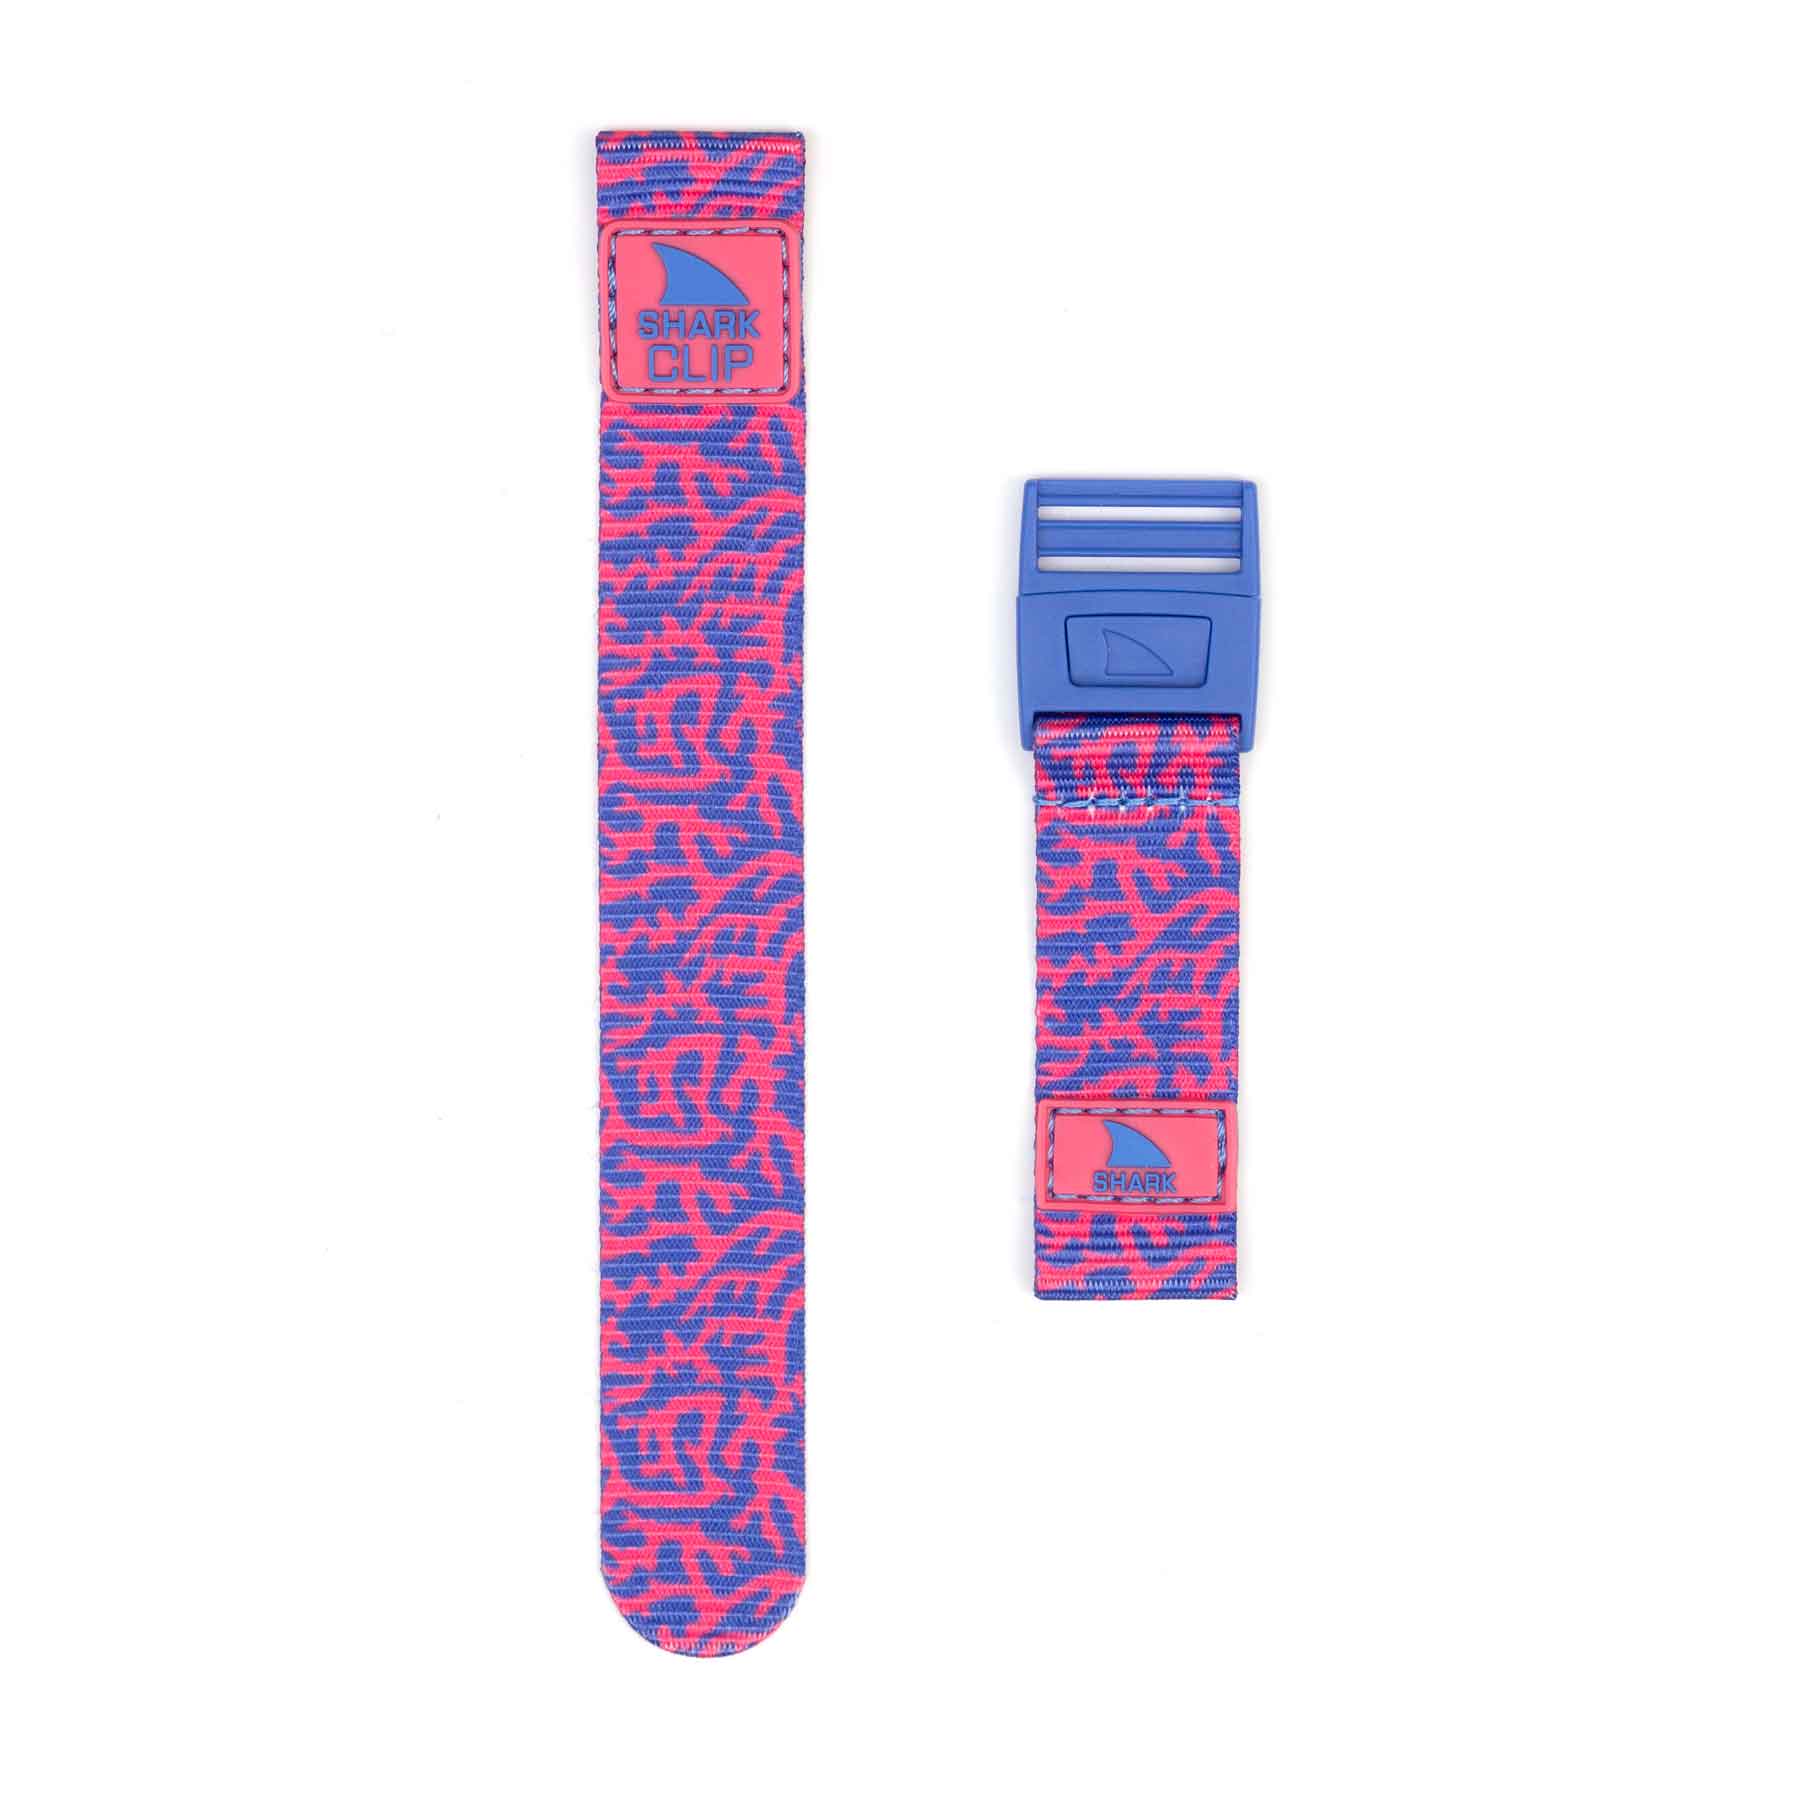 Shark Classic - Strap Kit - Clip - Coral Pink - Freestyle USA